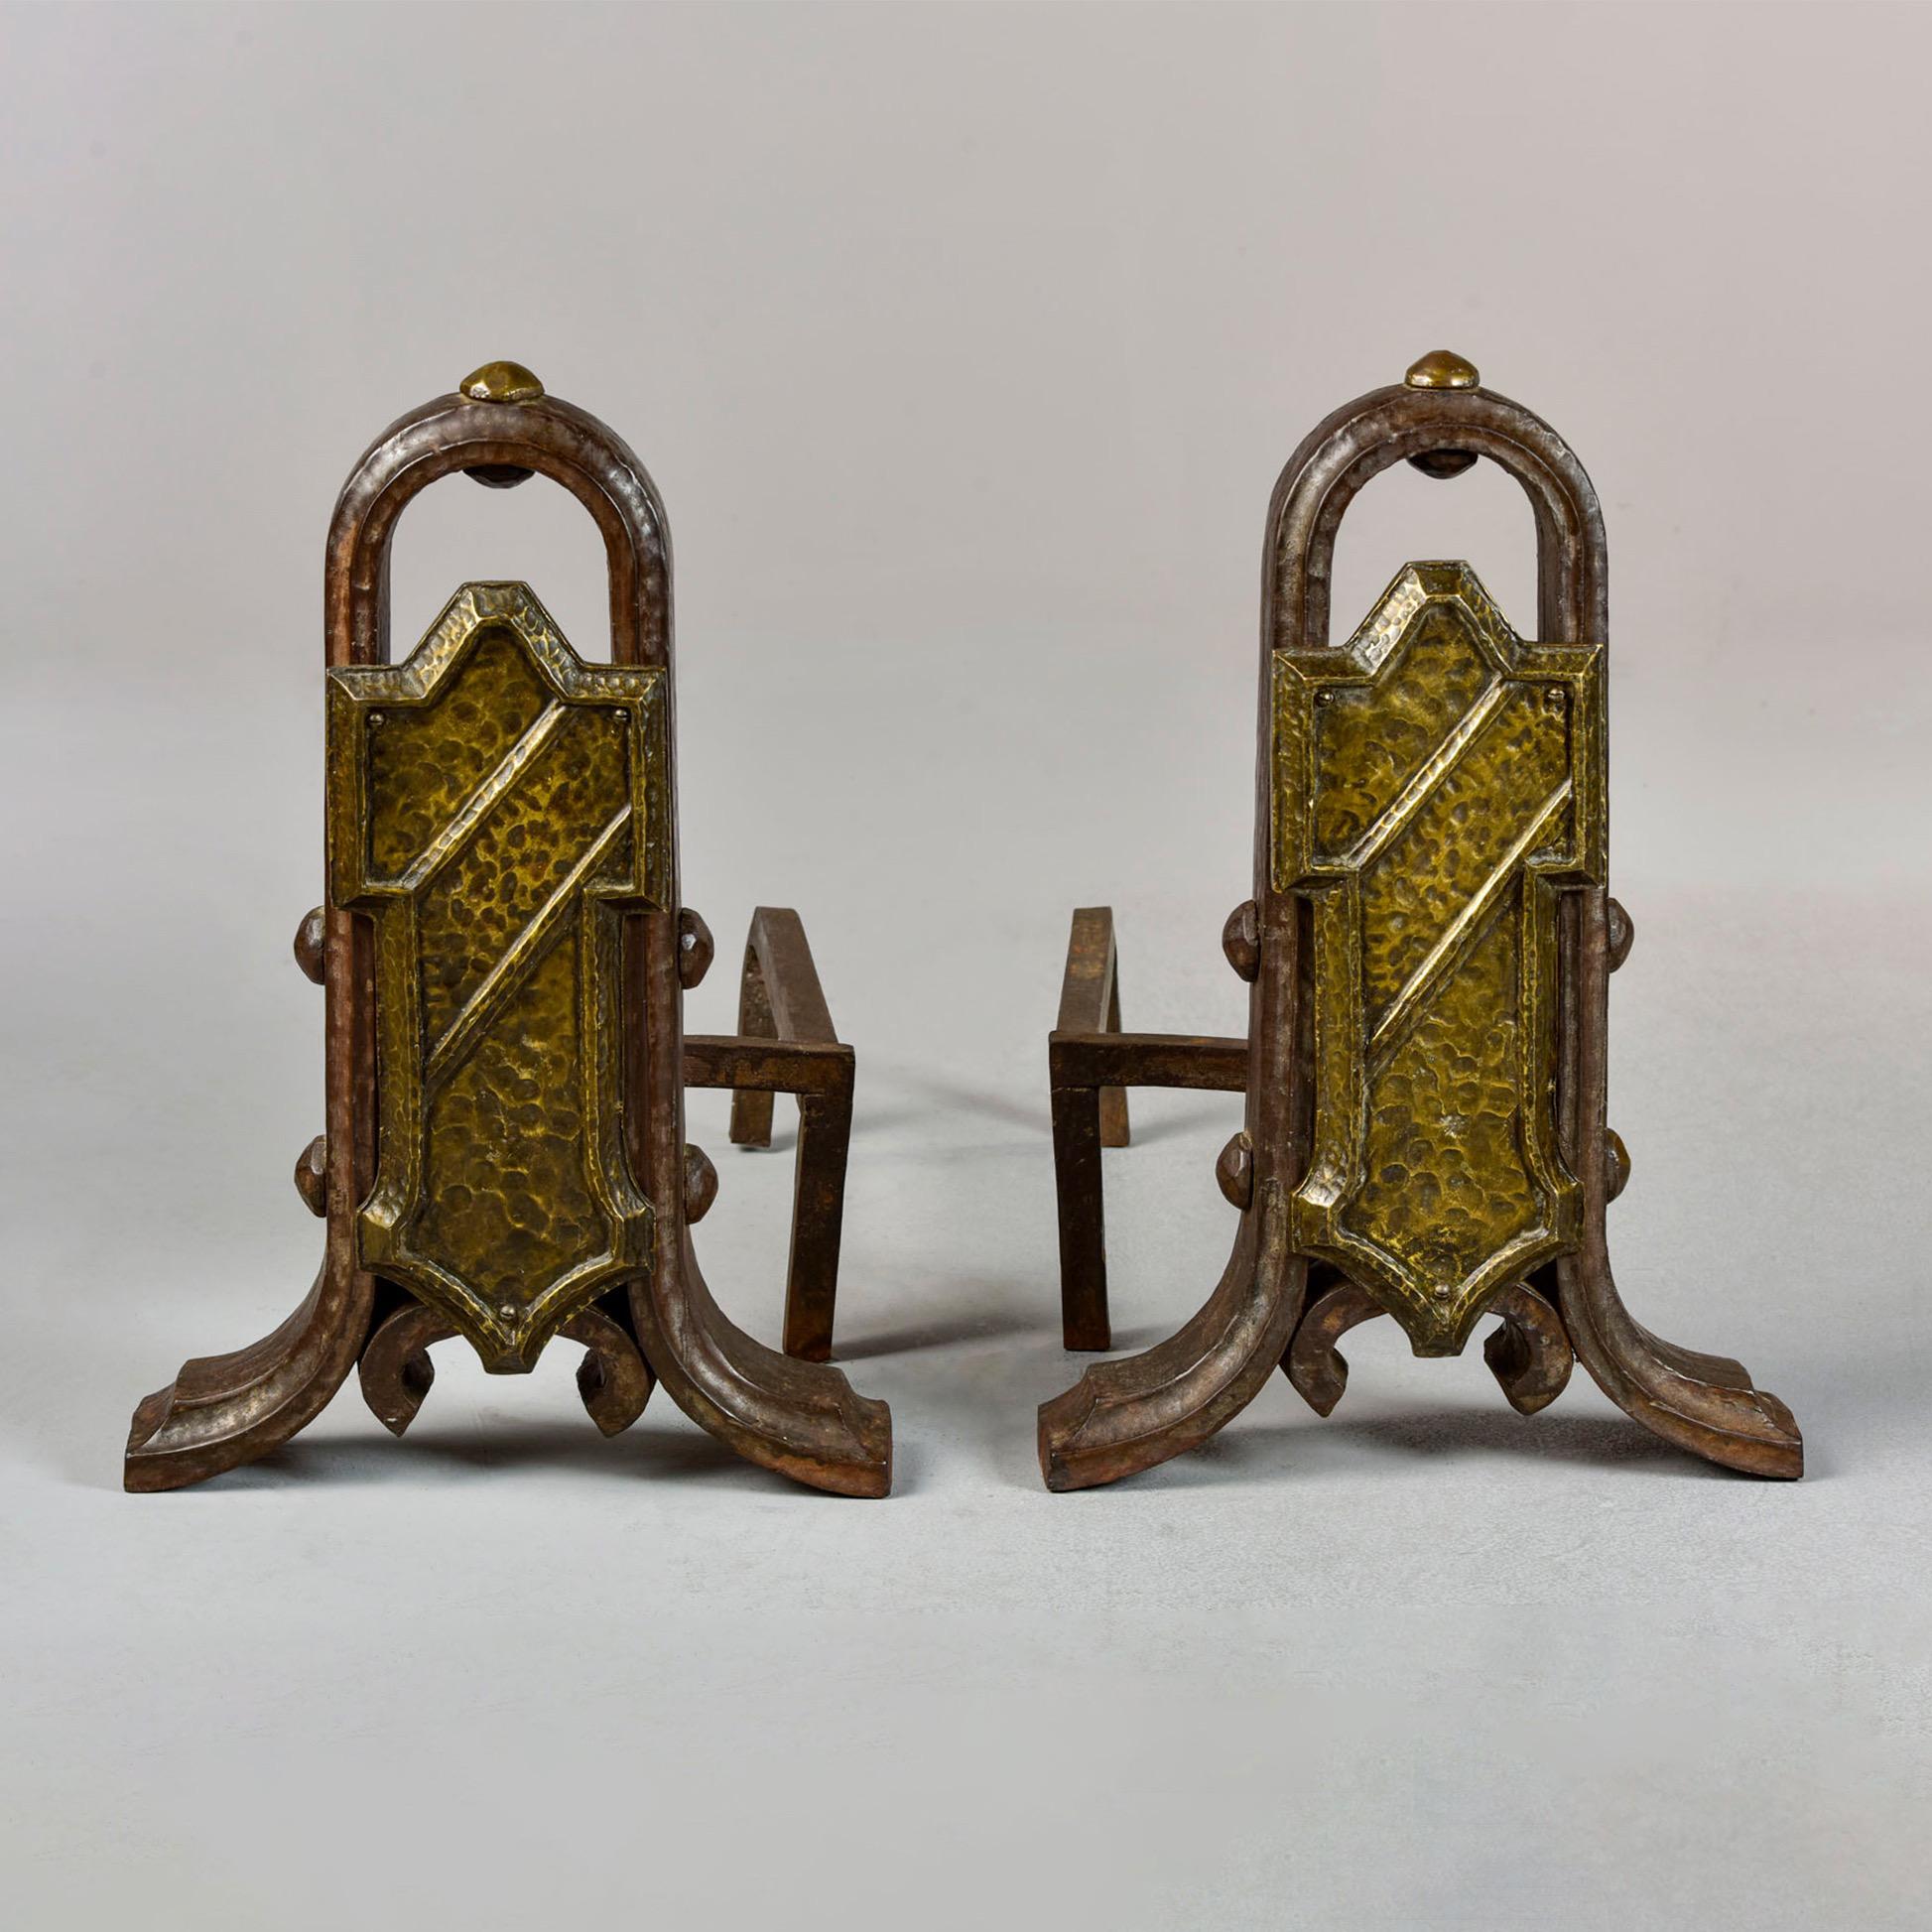 Circa 1910 pair of extra large andirons with plenty of Arts & Crafts era style in the hammered iron and brass fronts. Original firedogs. Unknown maker. Found in the US. Sold and priced as a pair.